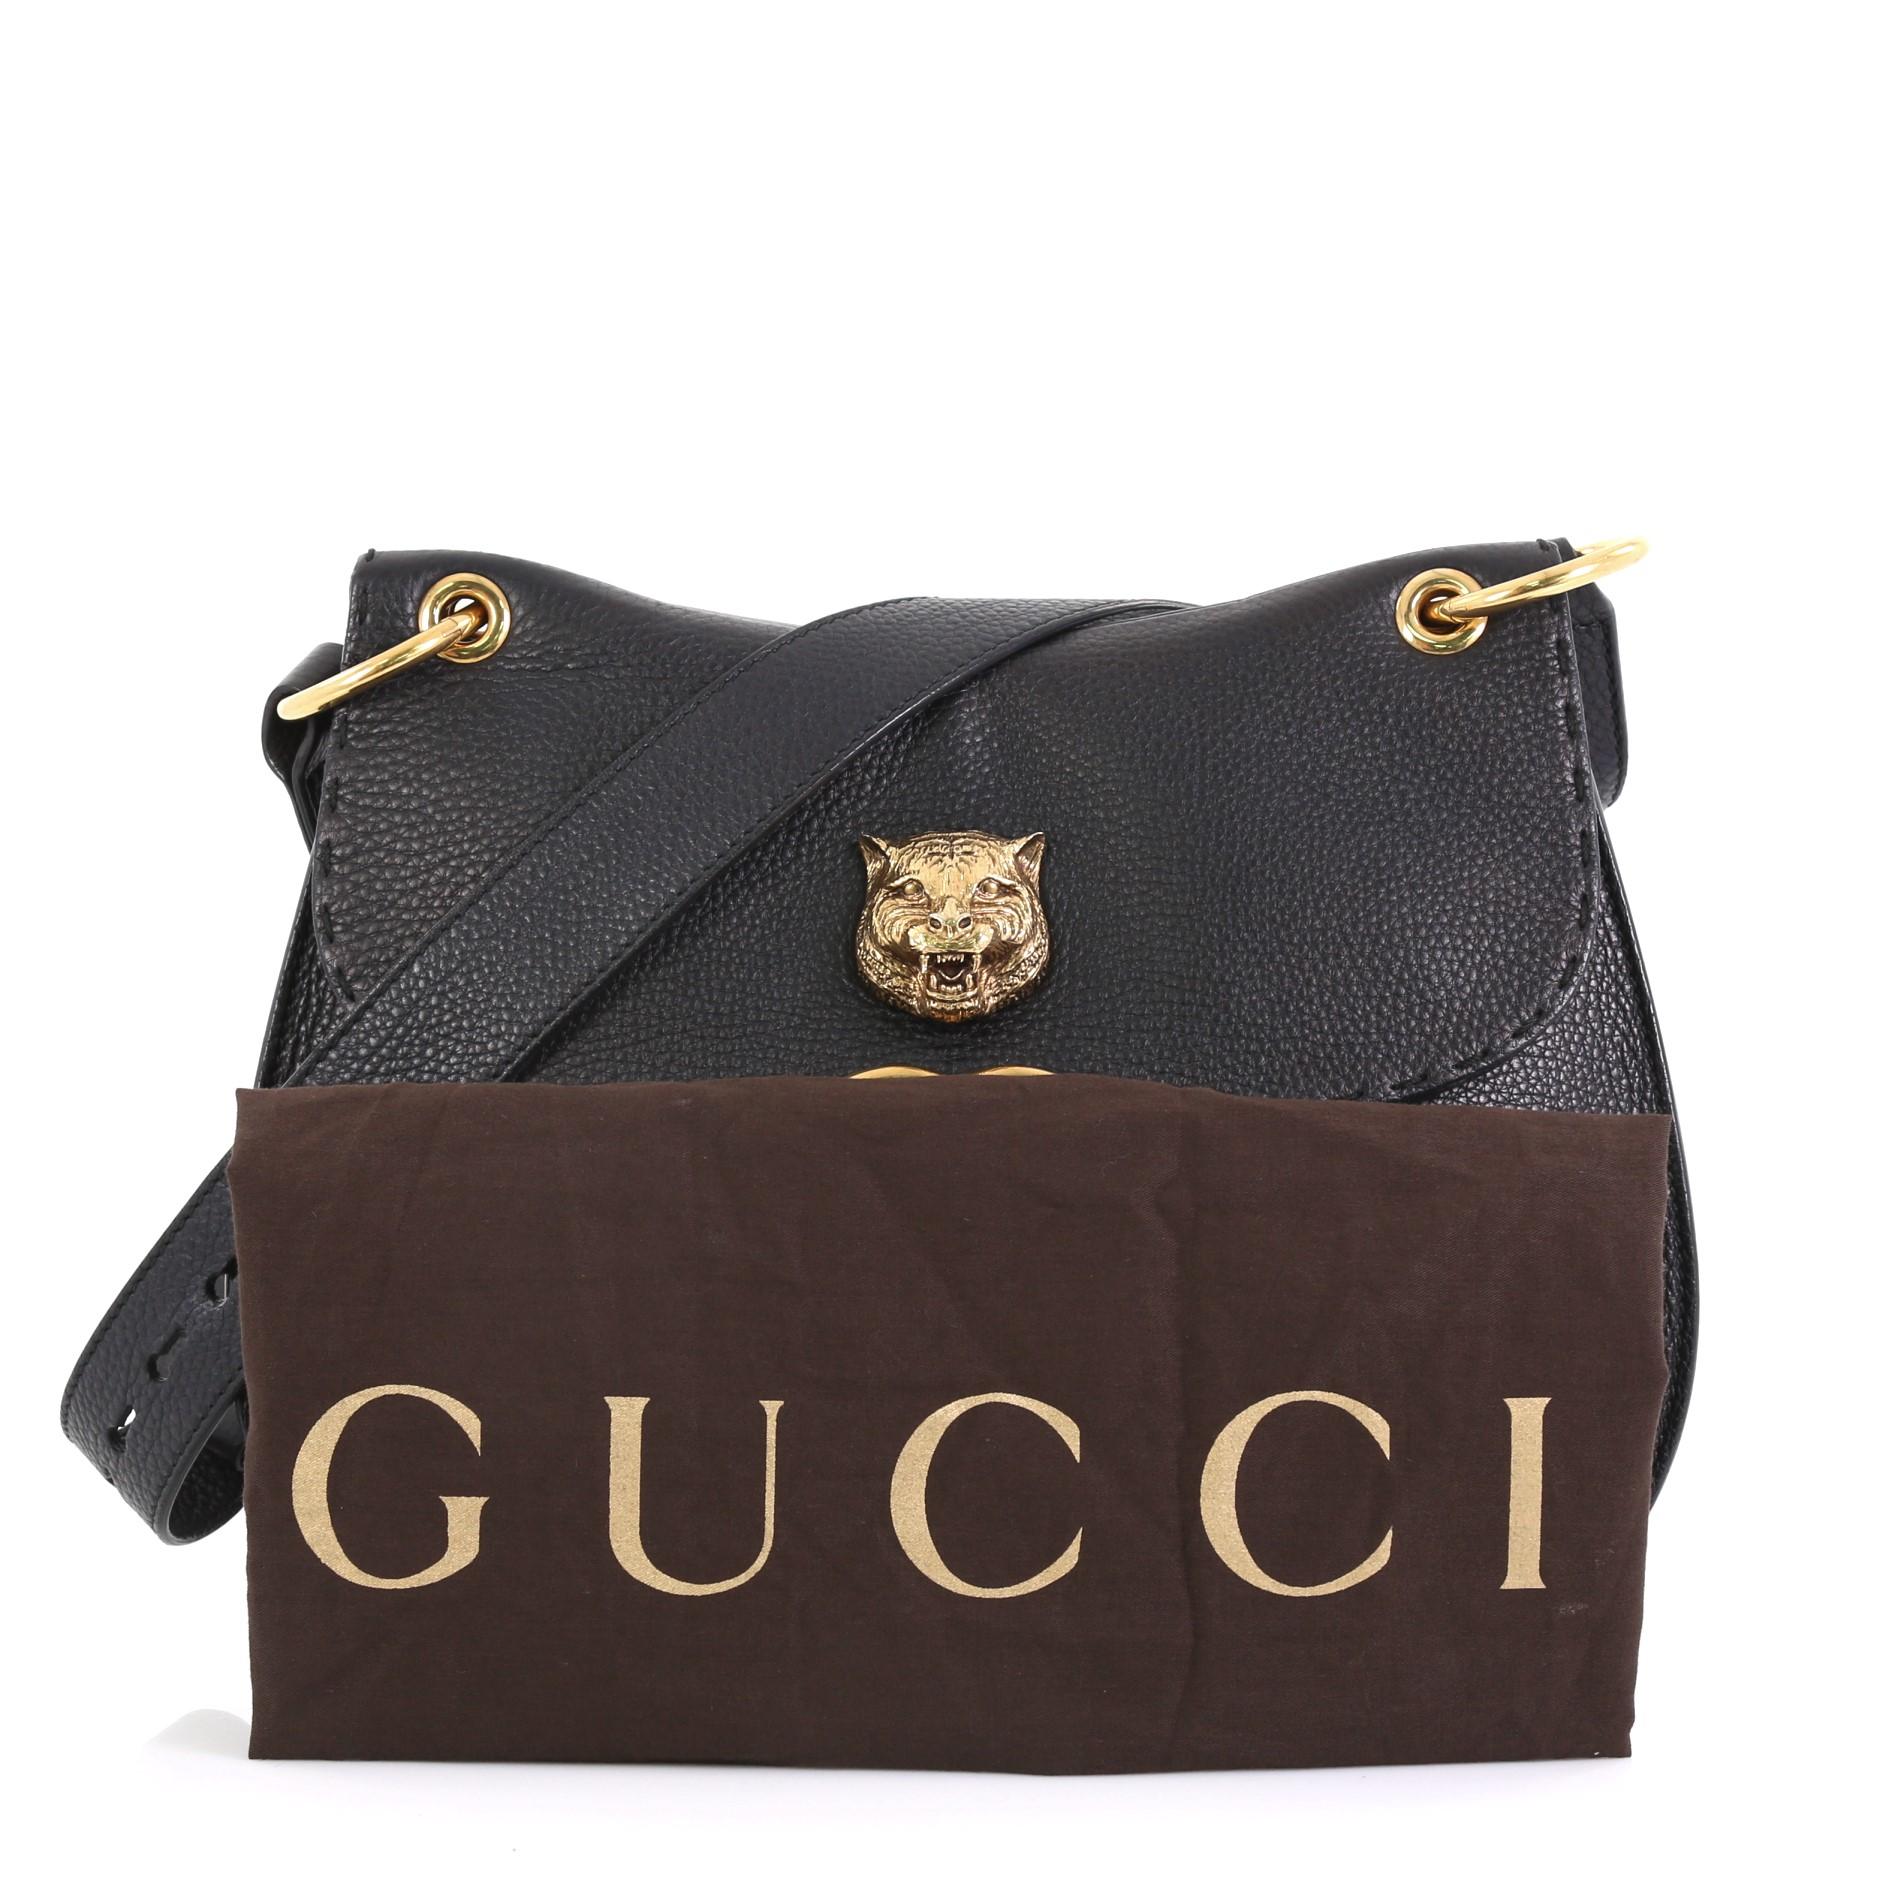 This Gucci GG Marmont Animalier Shoulder Bag Leather Medium, crafted in black leather, features long adjustable leather strap, front flap with animalier detail, and aged gold-tone hardware. Its snap button closure opens to a neutral fabric interior